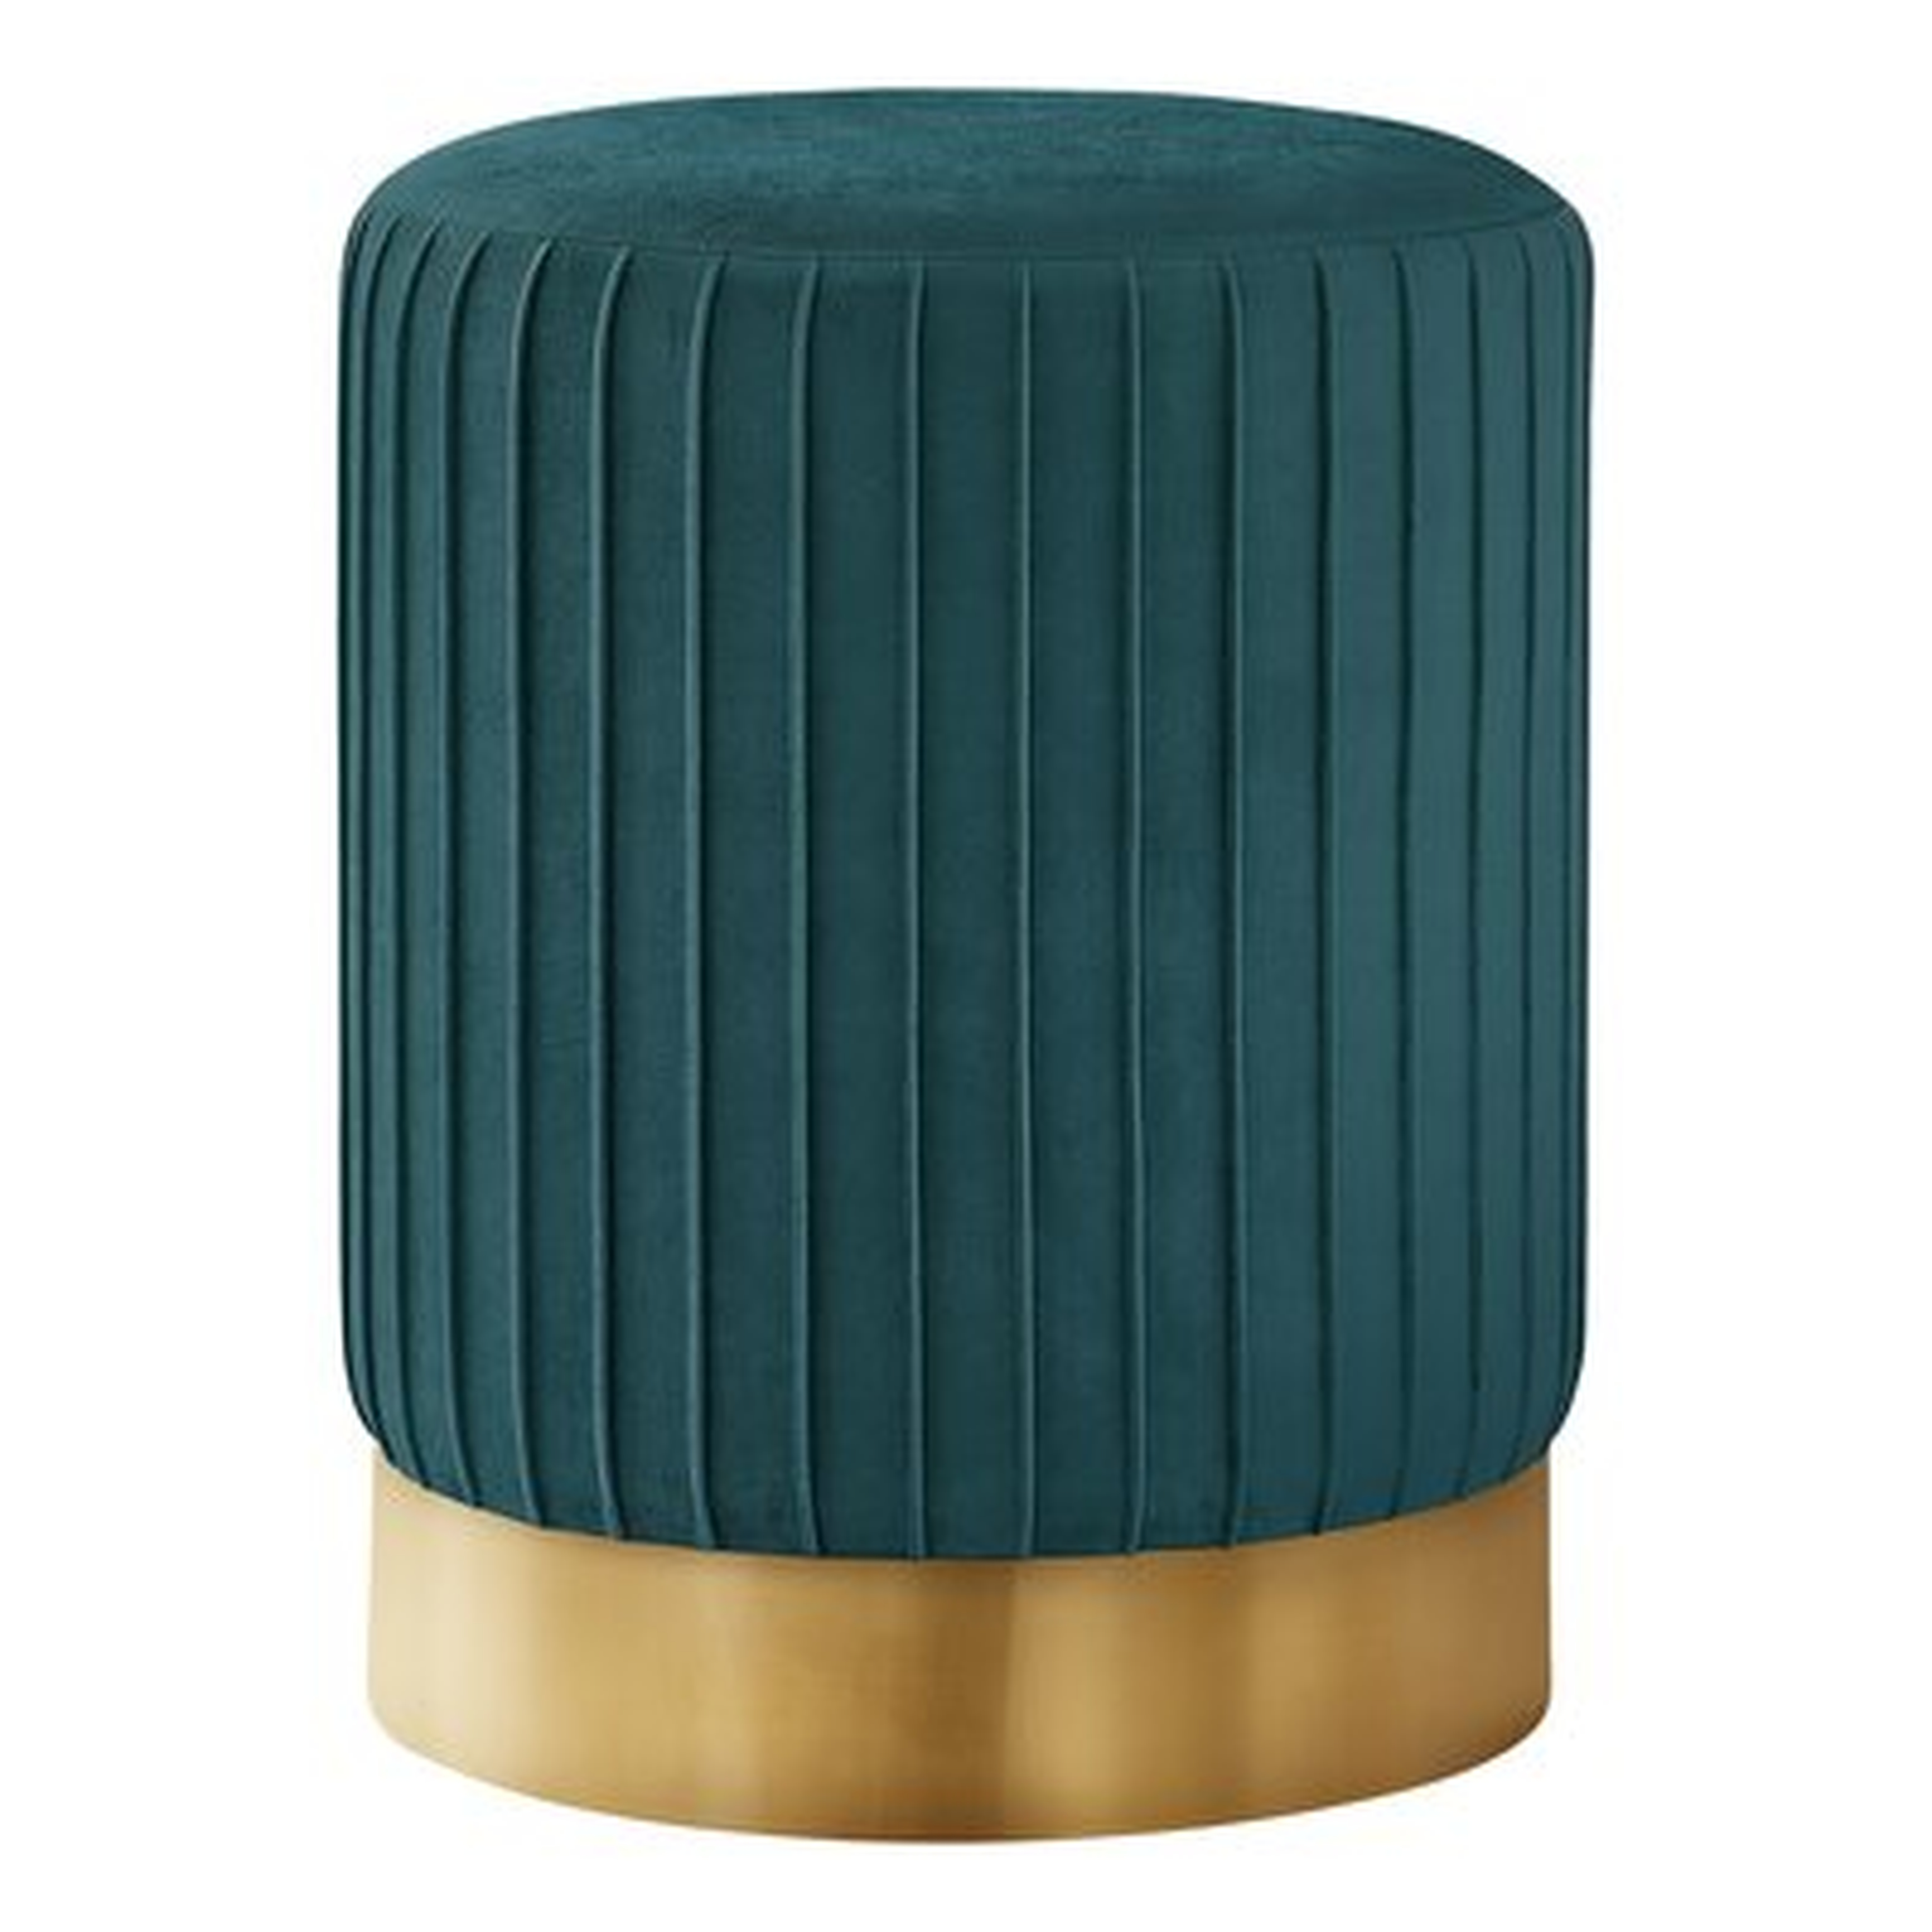 OTTOMAN - PLEATED SIDES / METAL BASE / CYLINDRICAL UPHOLSTERED POUF - 18"H - Turquoise / GOLD - Wayfair